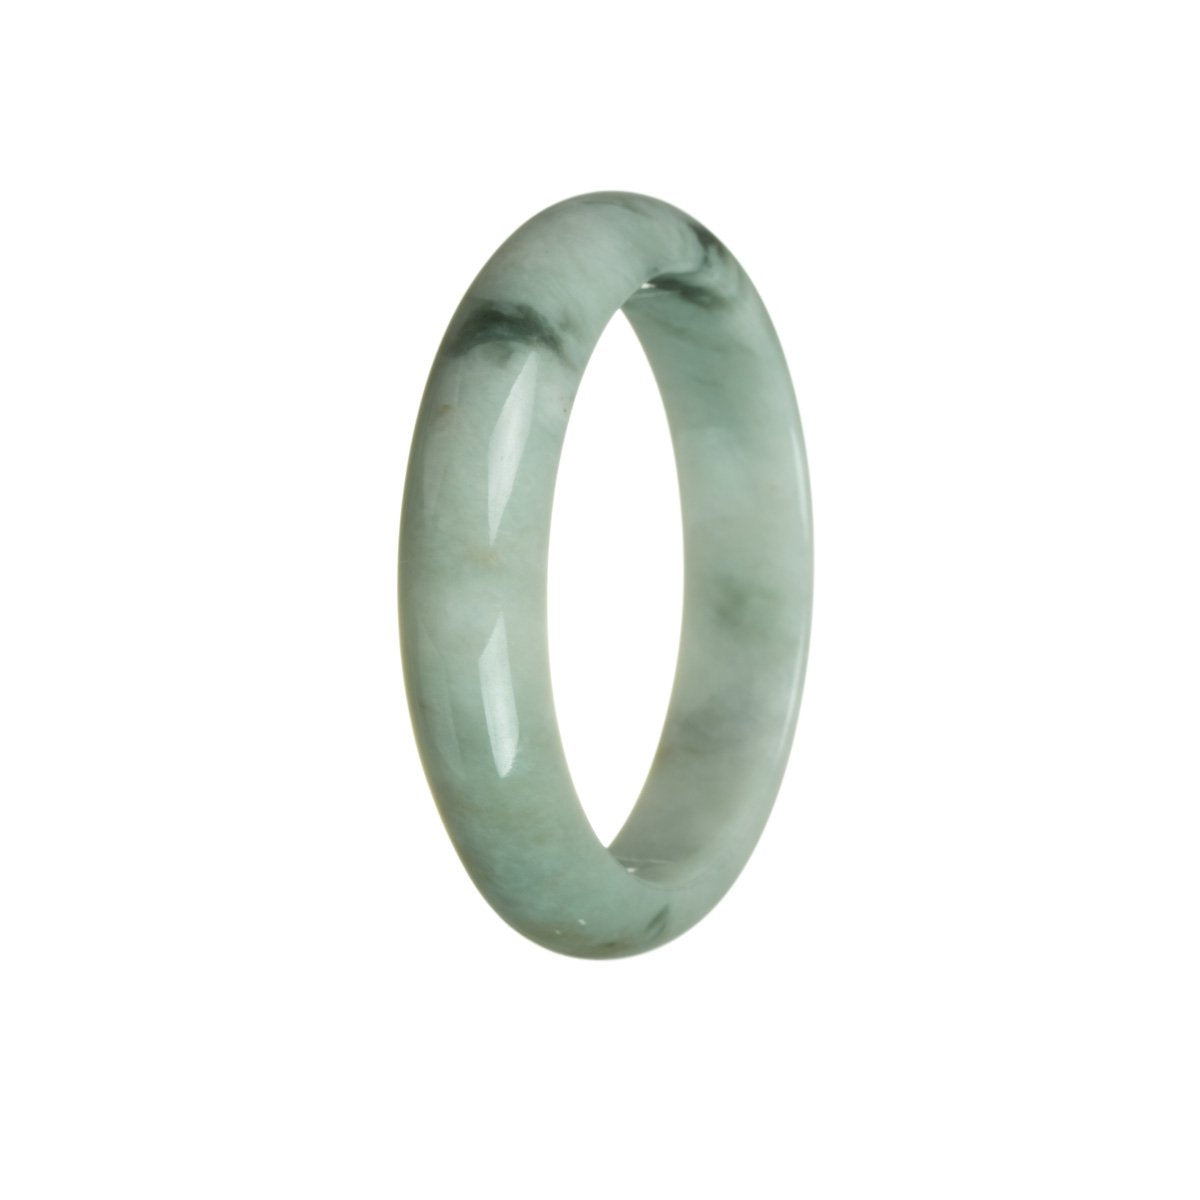 A close-up image of an authentic untreated bluish green jadeite jade bracelet. The bracelet features a half-moon shape and measures 56mm in diameter. Crafted by MAYS GEMS.